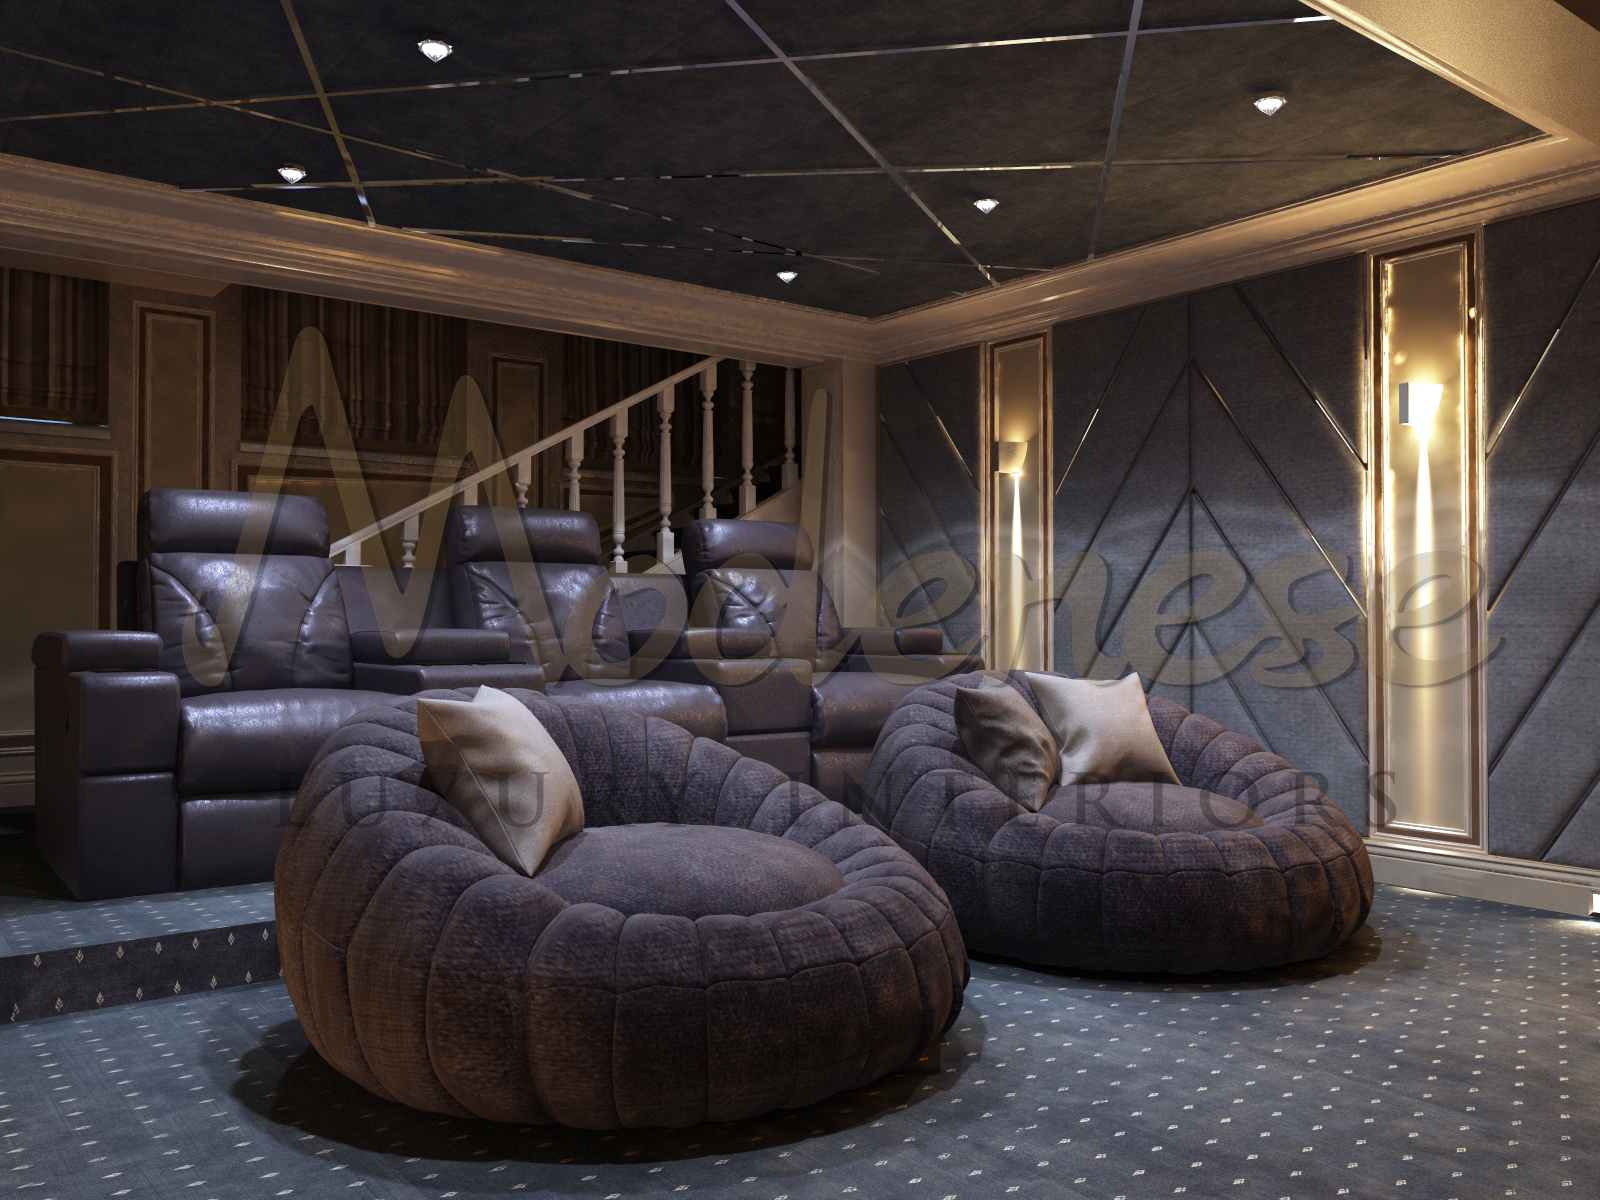 Modern Furniture For Home Cinema in London, Great Britain